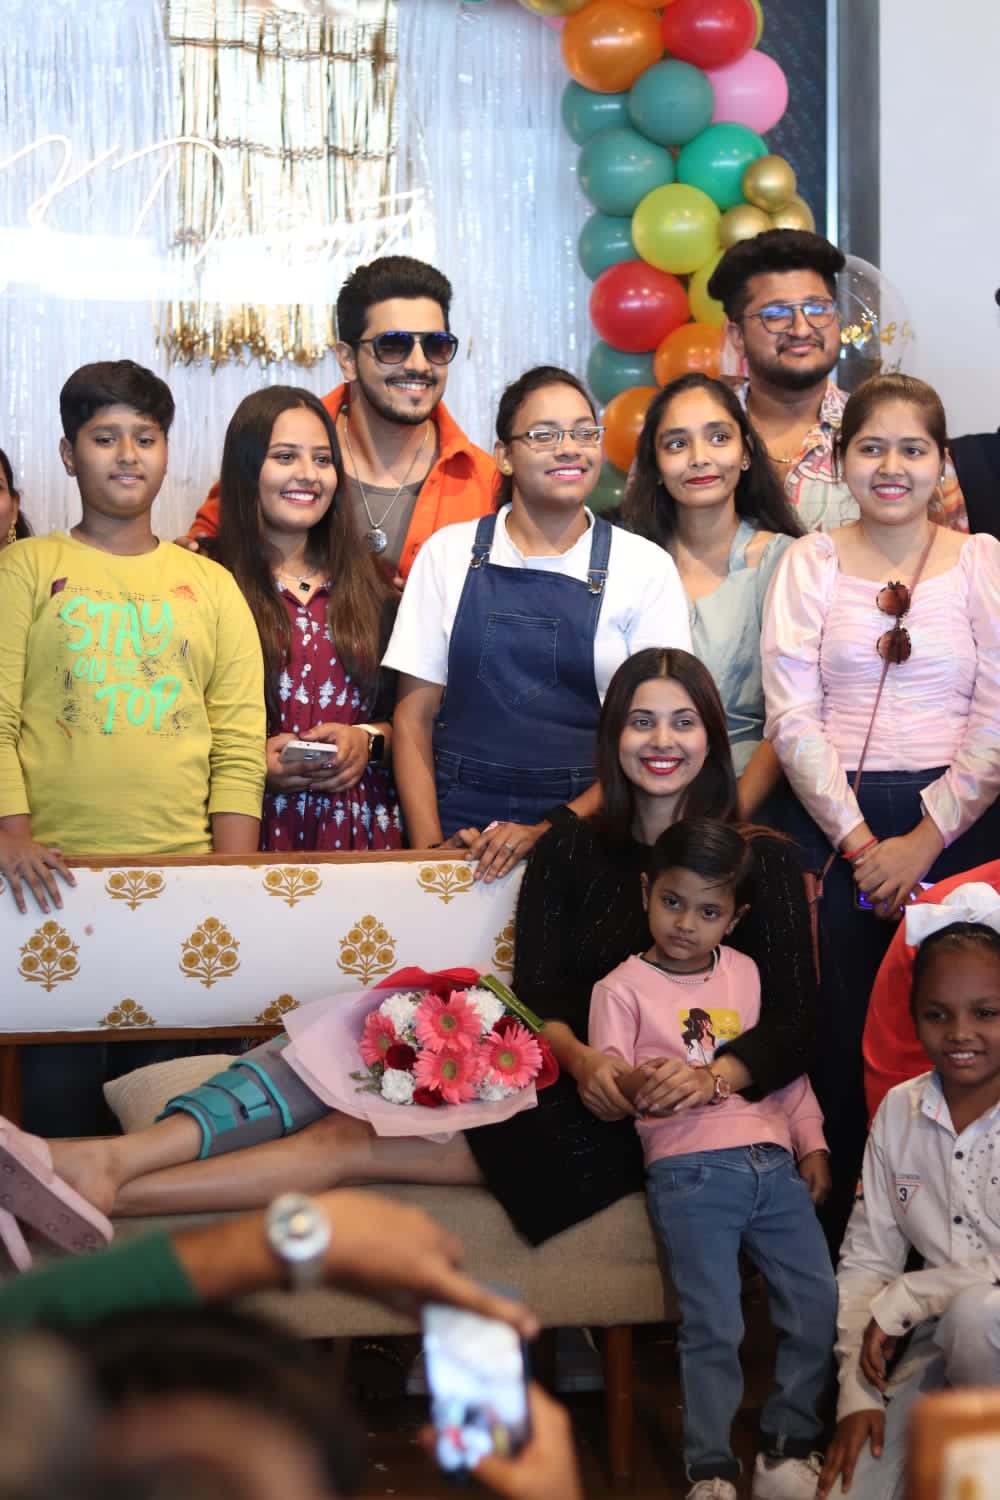 Fans traveled hours to attend Kanwar Dhillon's royal lunch 'Meet & Greet' in Mumbai.